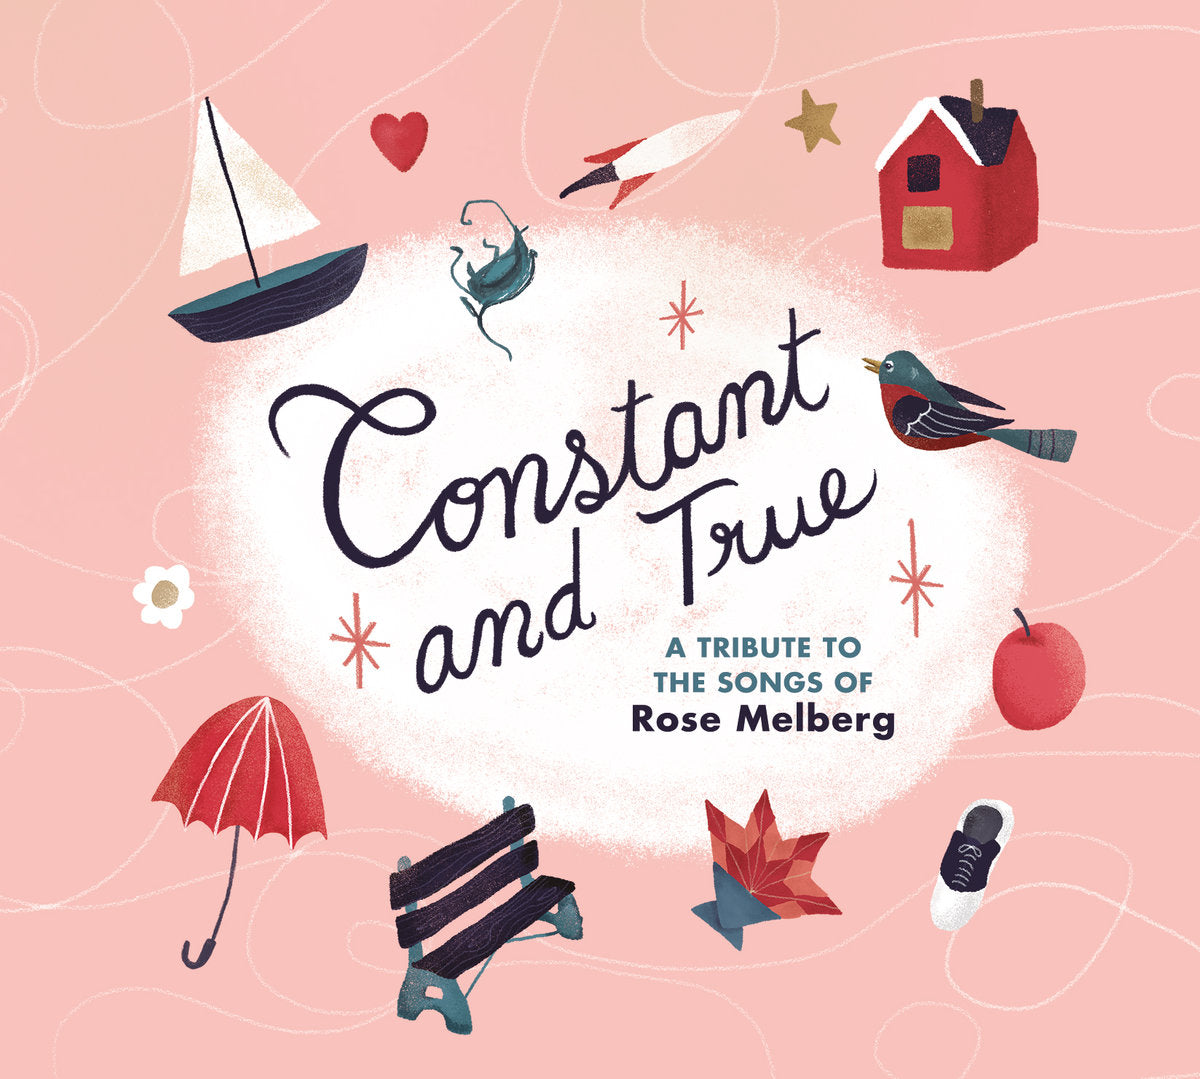 VARIOUS ARTISTS "Constant And True: A Tribute To The Songs Of Rose Melberg" CD